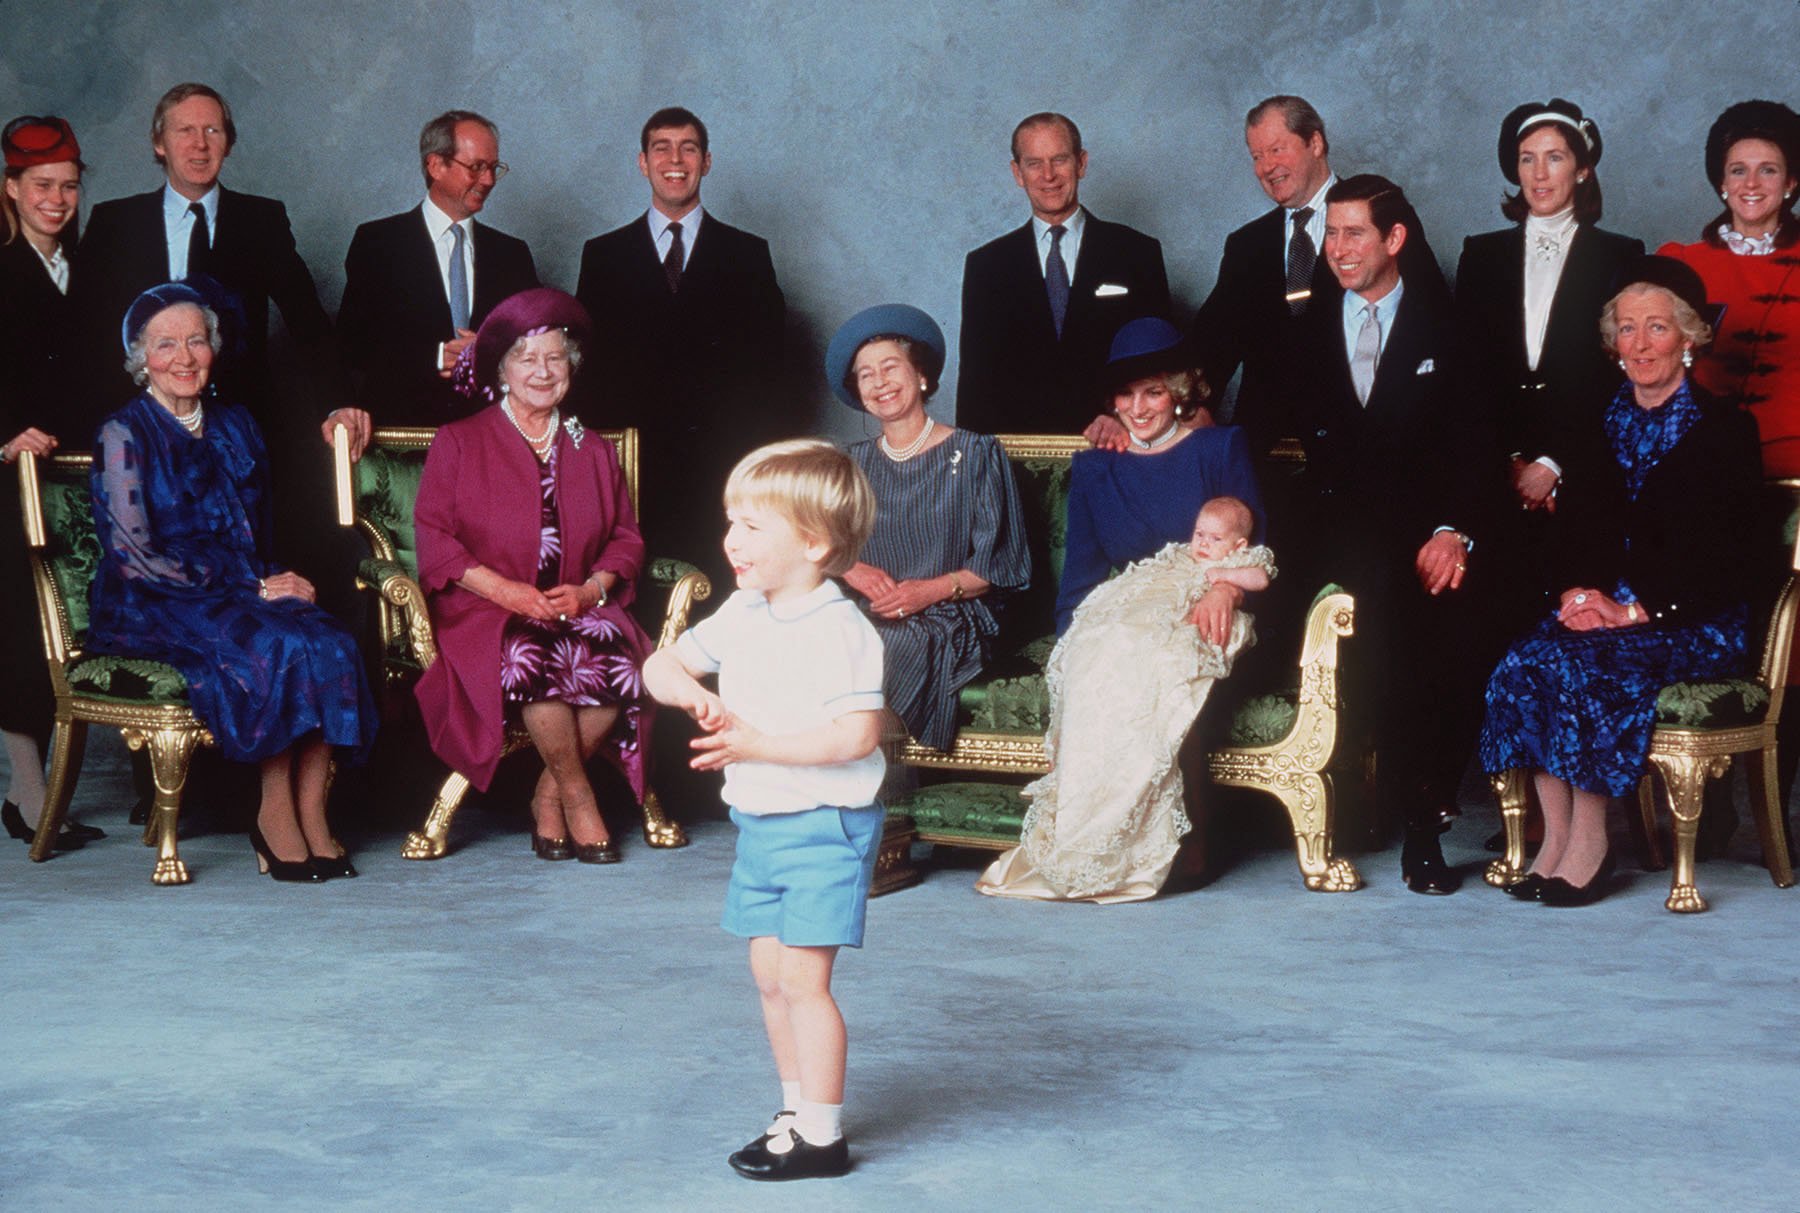 Royal relatives and godparents who are amused at the antics of young Prince William, Prince Harry is christened at Windsor Castle on December 21, 1984 in Windsor, England | Source: Getty Images